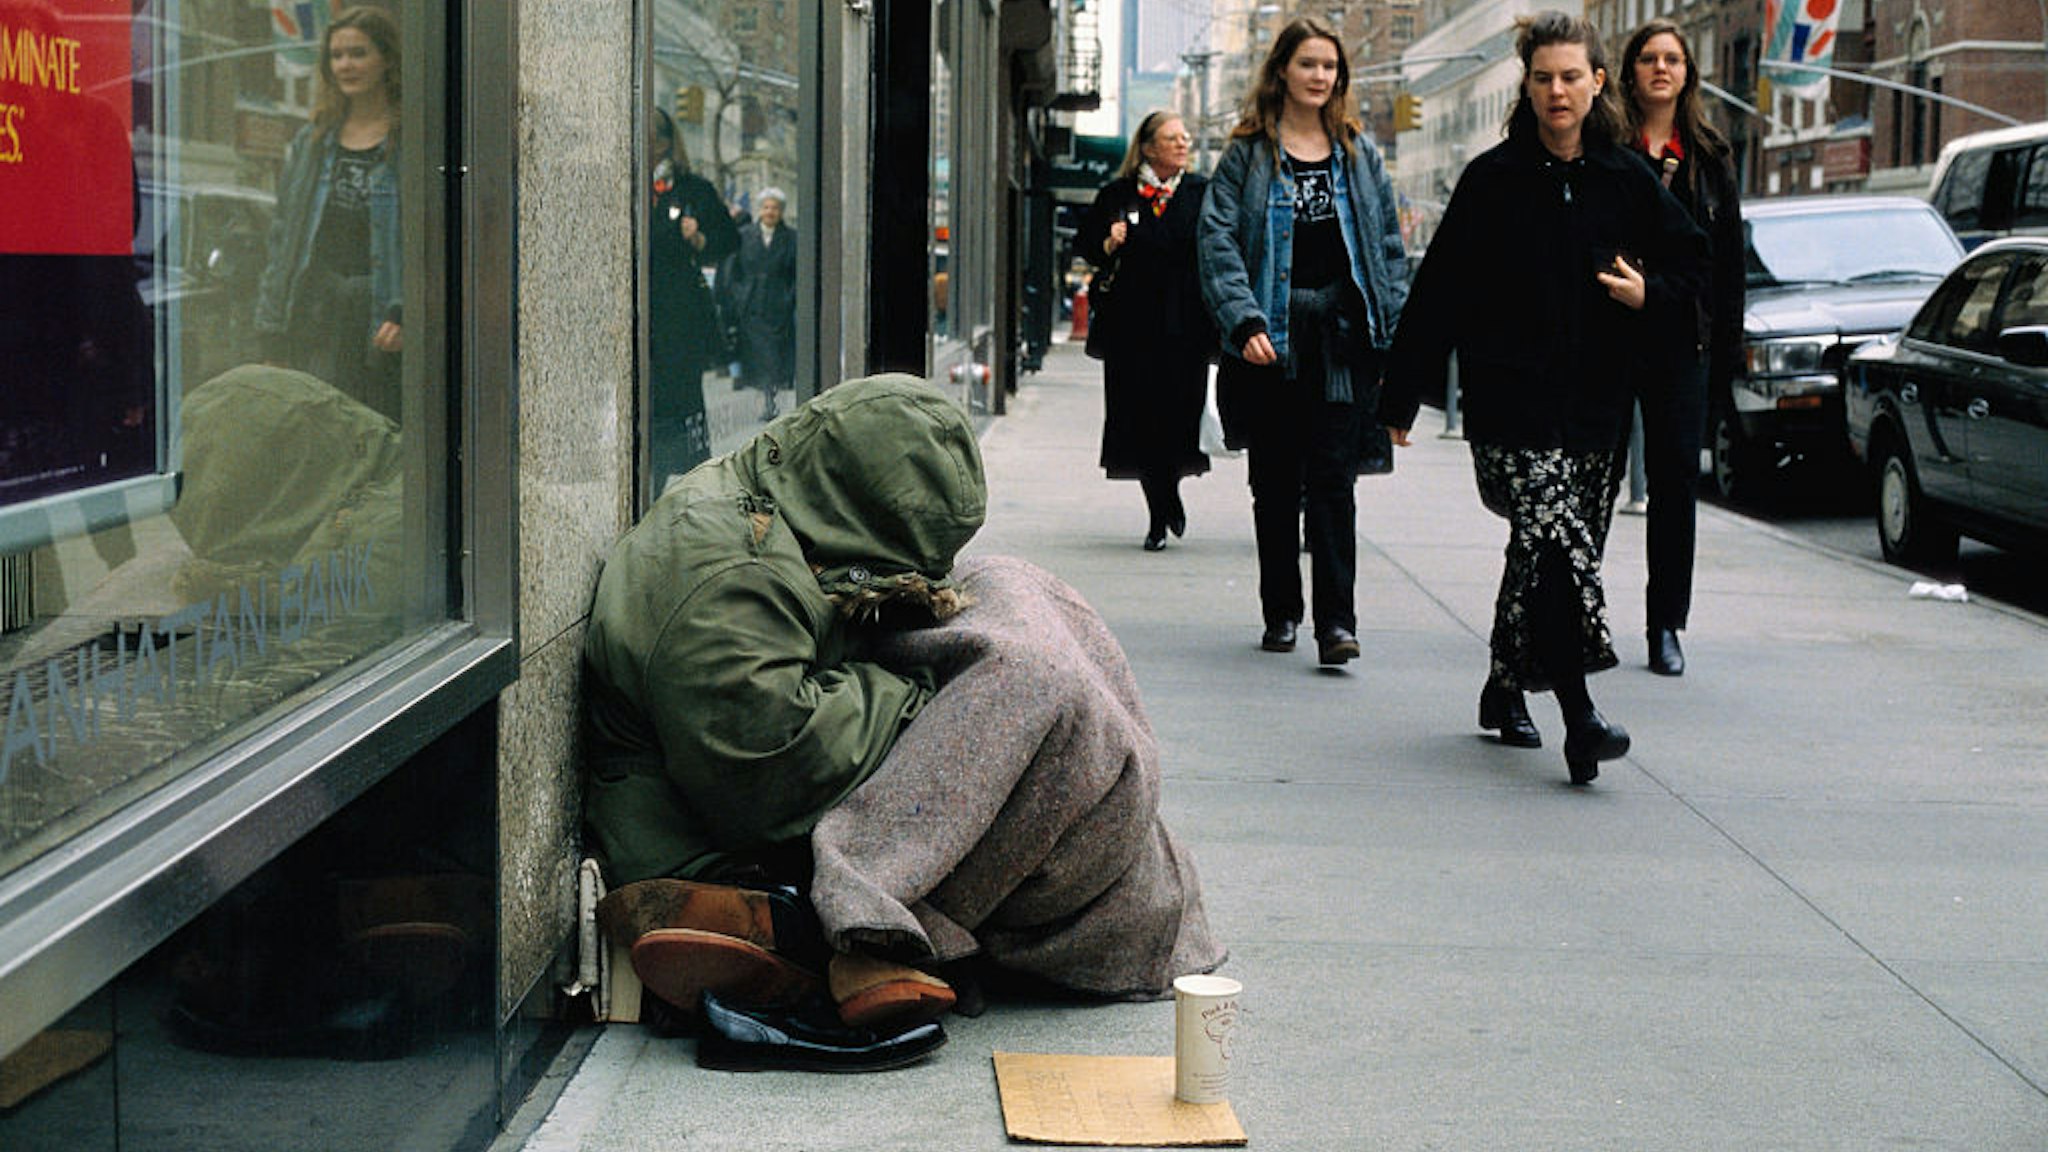 A group of women walk past a homeless woman begging for money along a city sidewalk. (Photo by © Viviane Moos/CORBIS/Corbis via Getty Images)